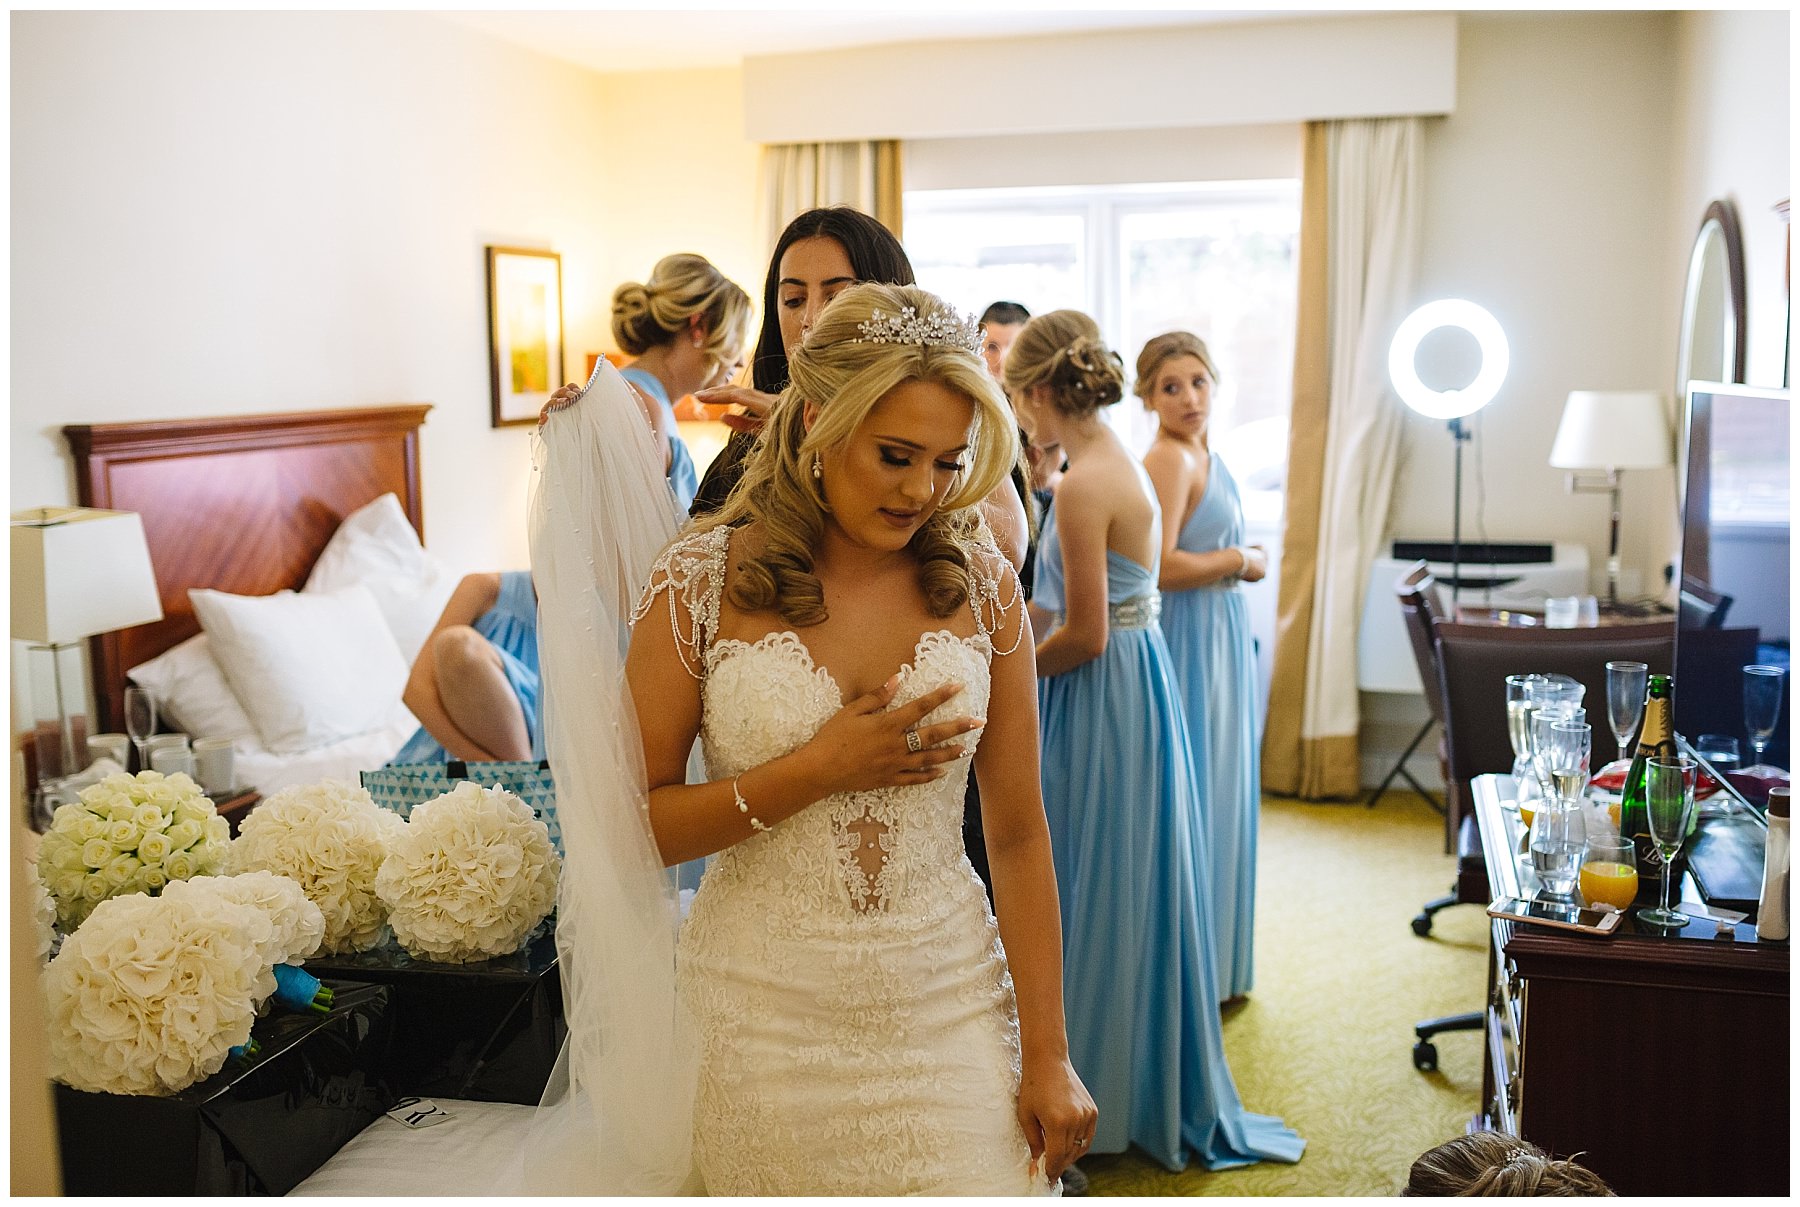 bride in wedding dress has finishing touches applied